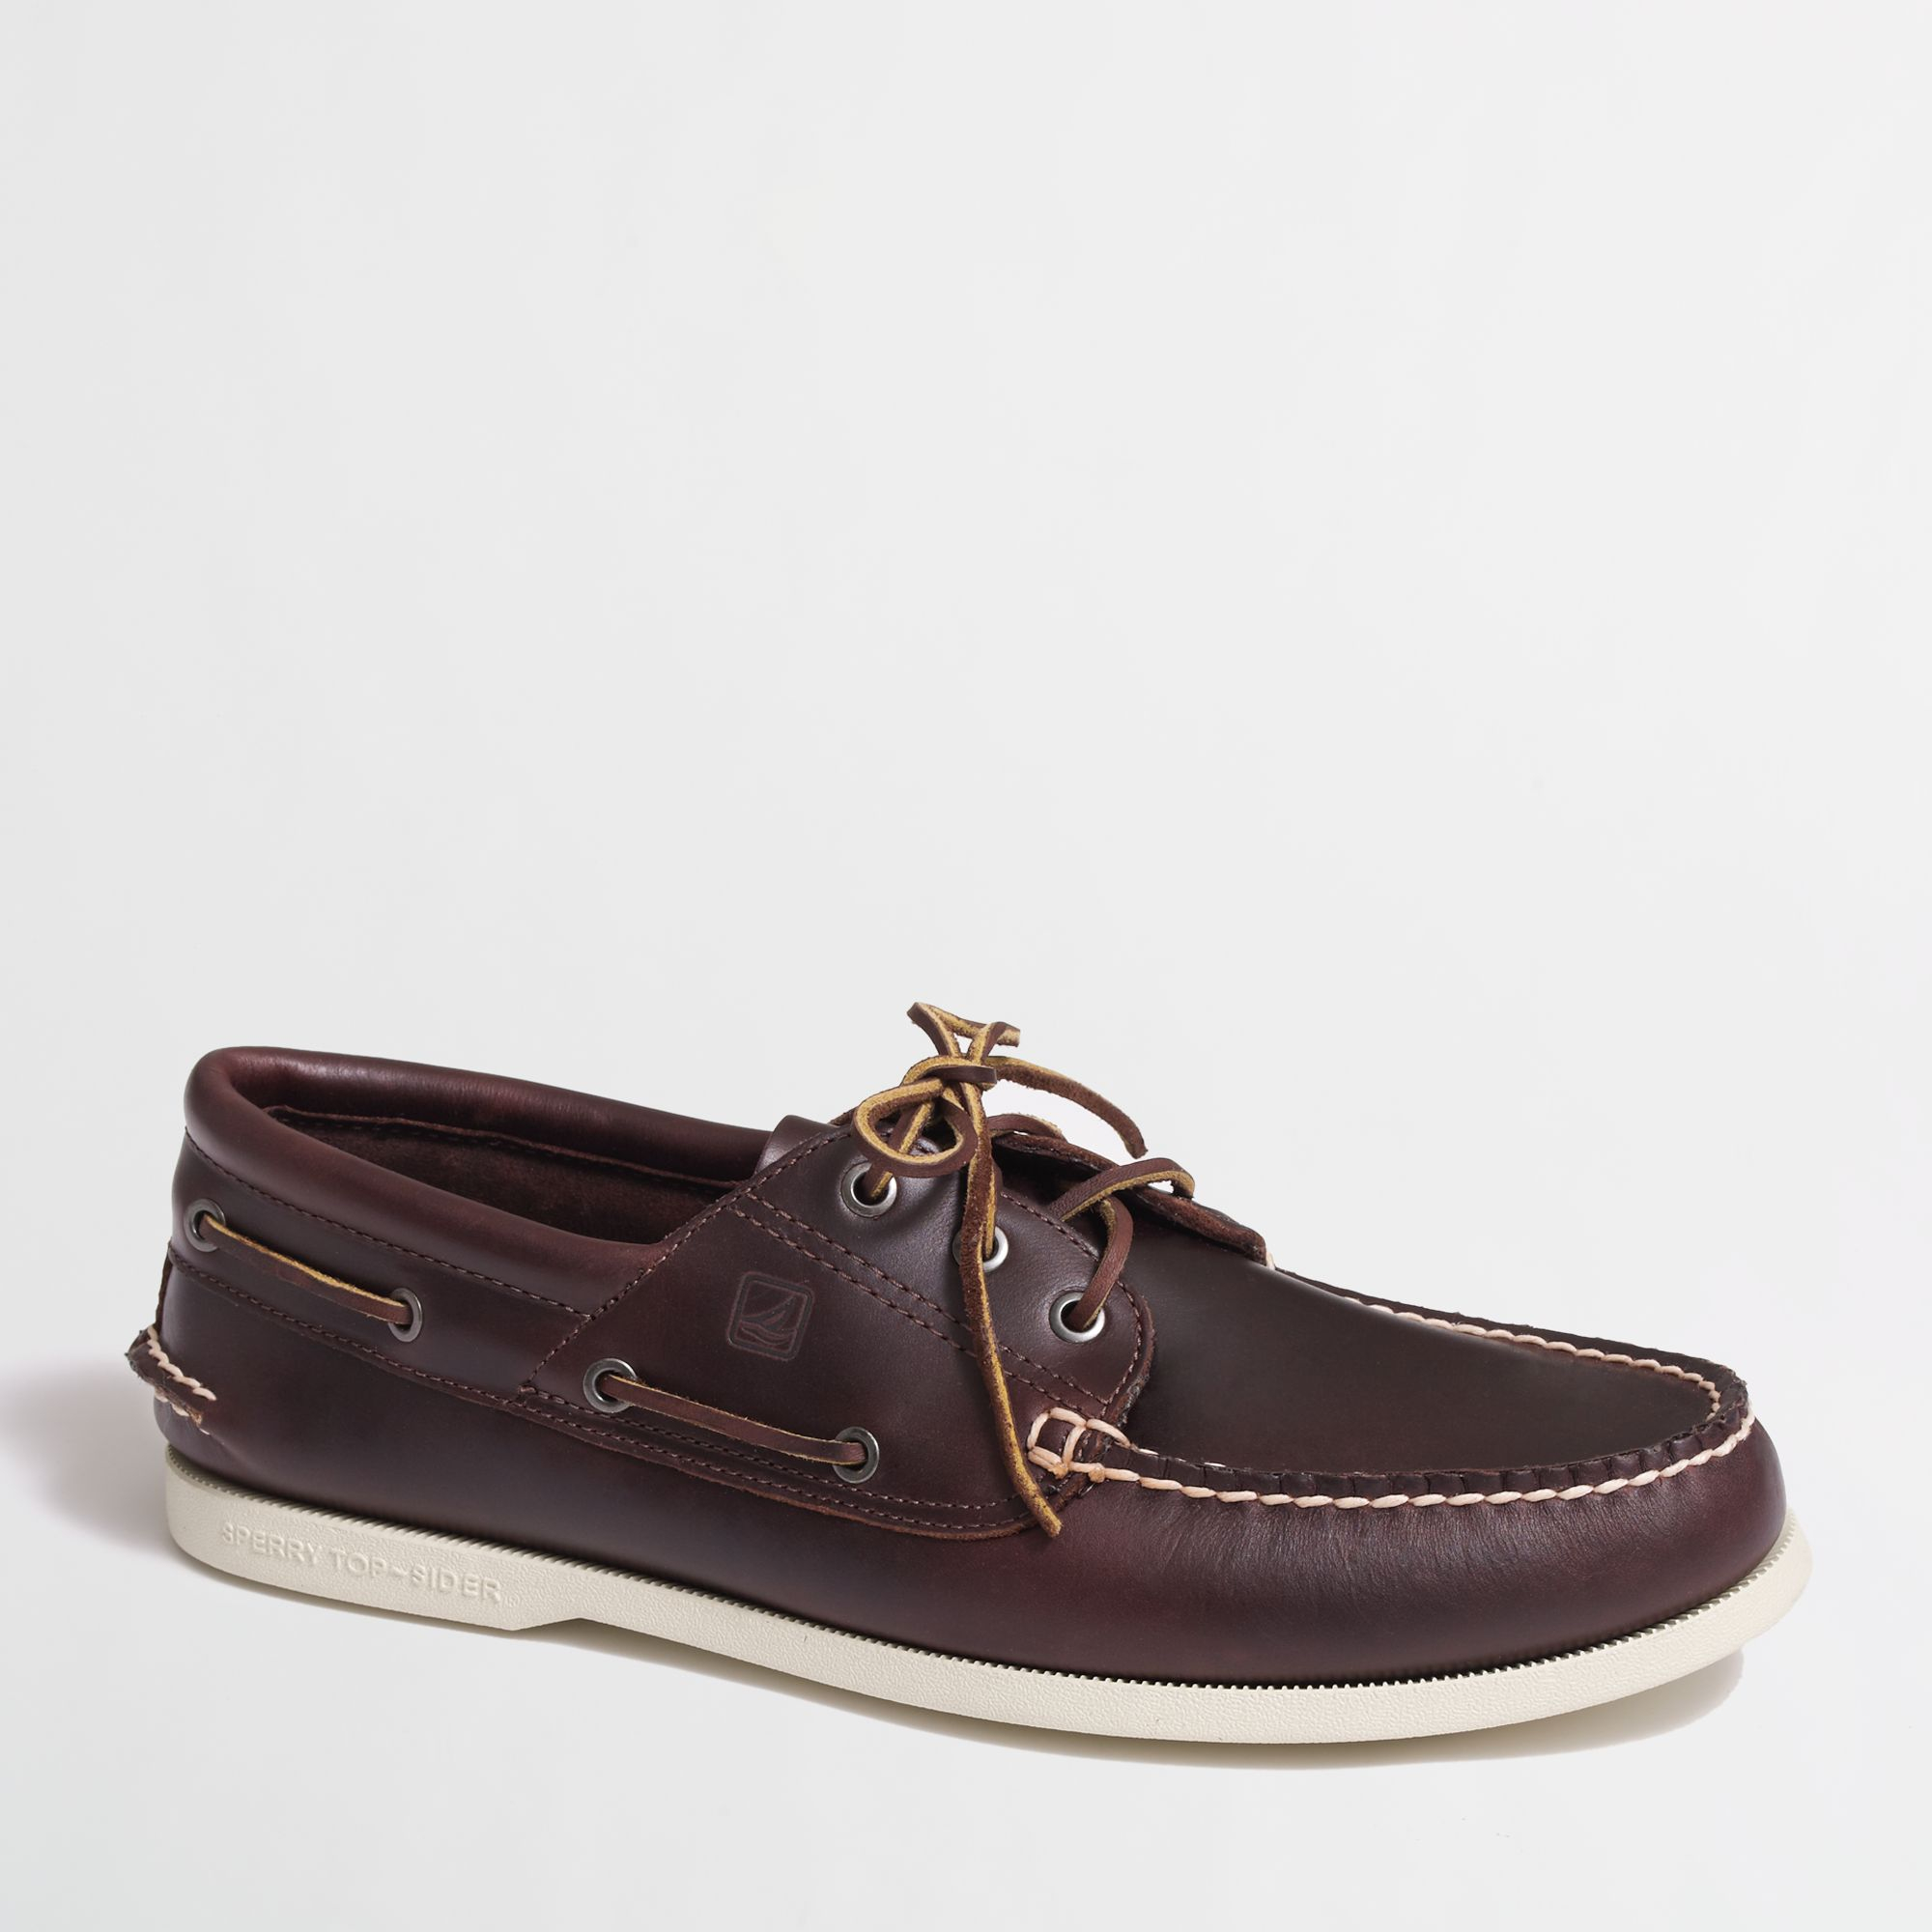 J.crew Sperry Topsider For Authentic Original 3eye Boat Shoes in Brown ...